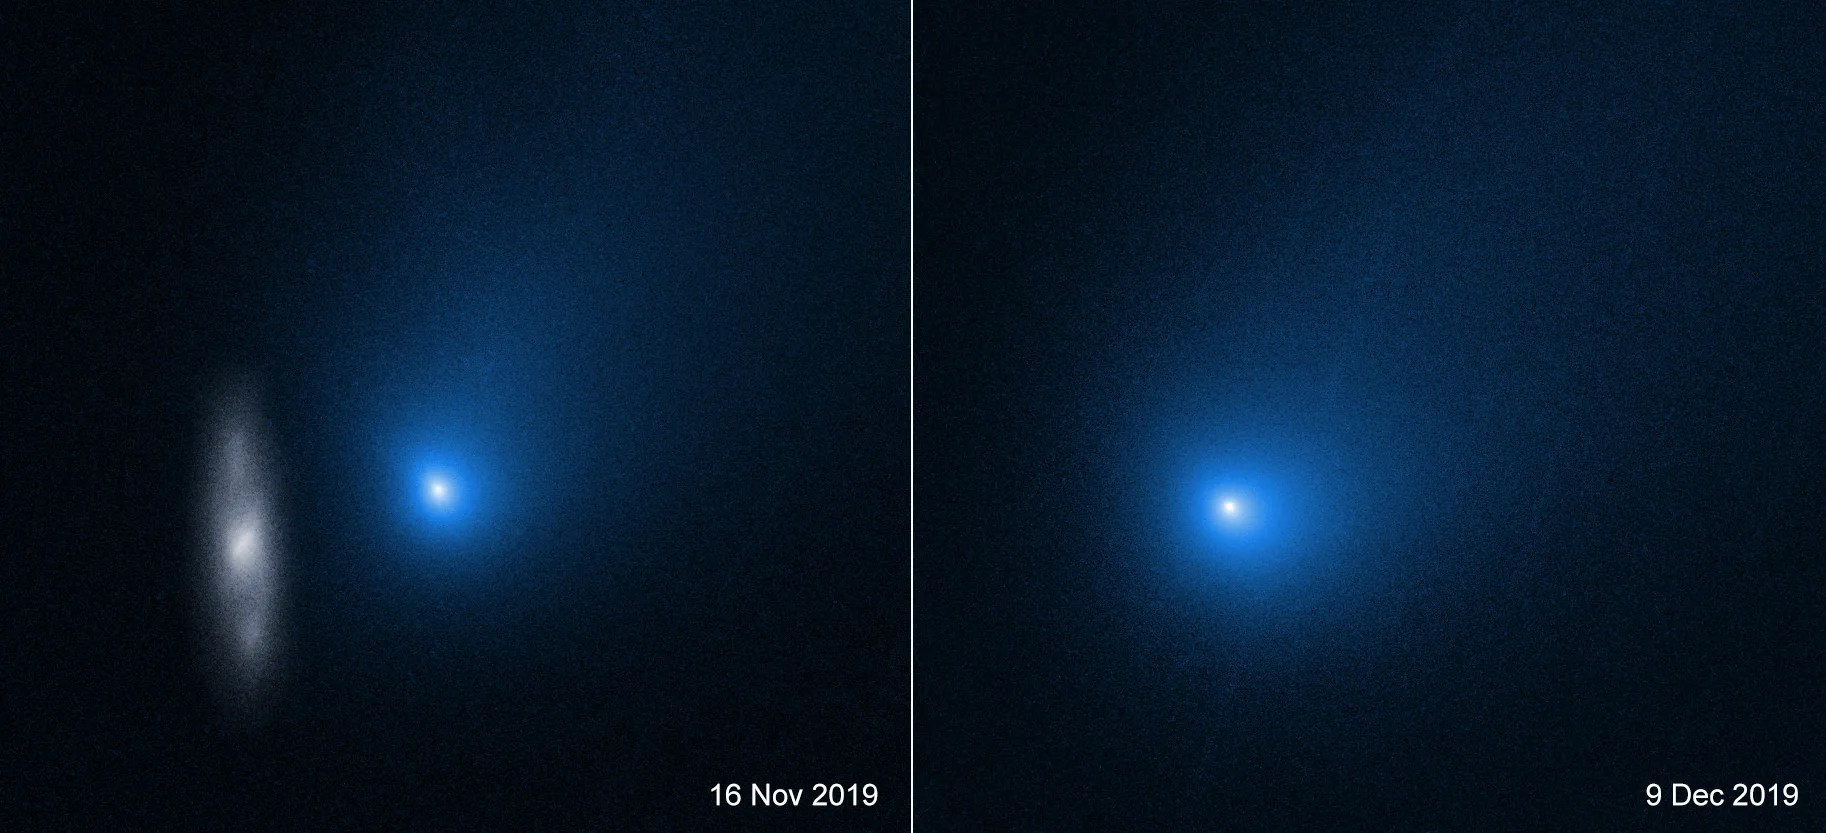 Two views of comet 2I/Borisov from Hubble